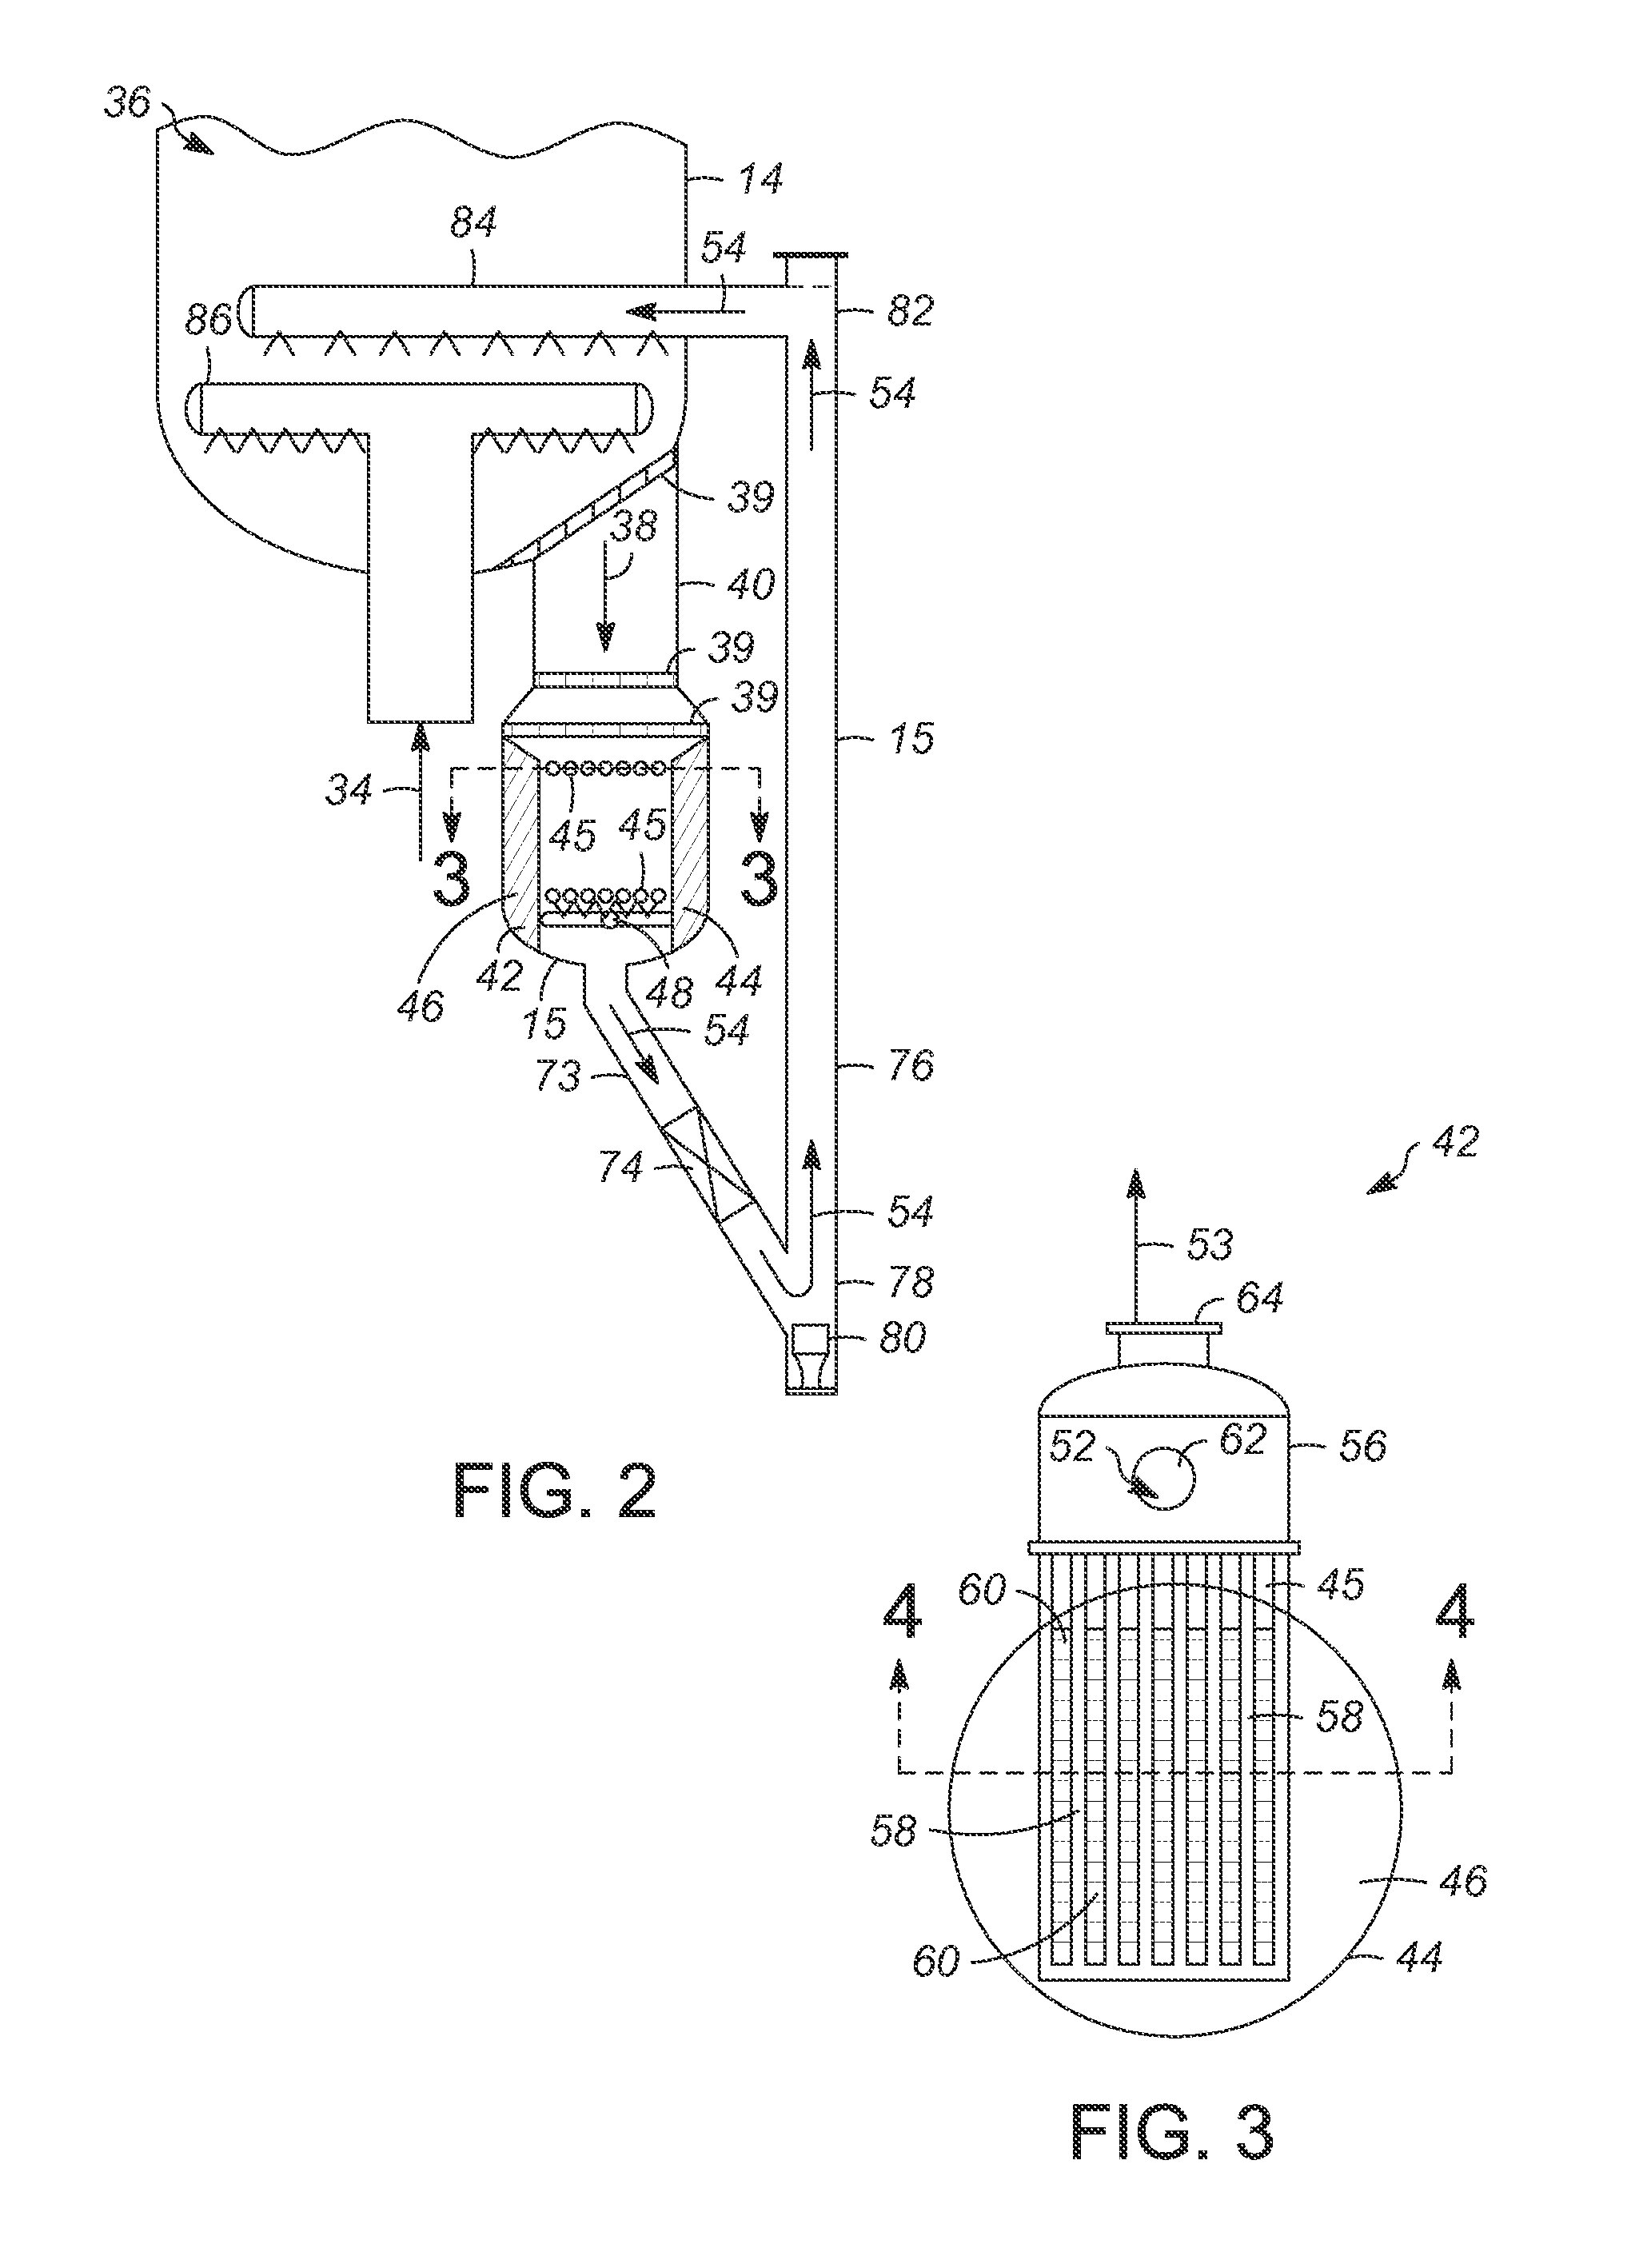 Apparatuses for controlling heat for rapid thermal processing of carbonaceous material and methods for the same